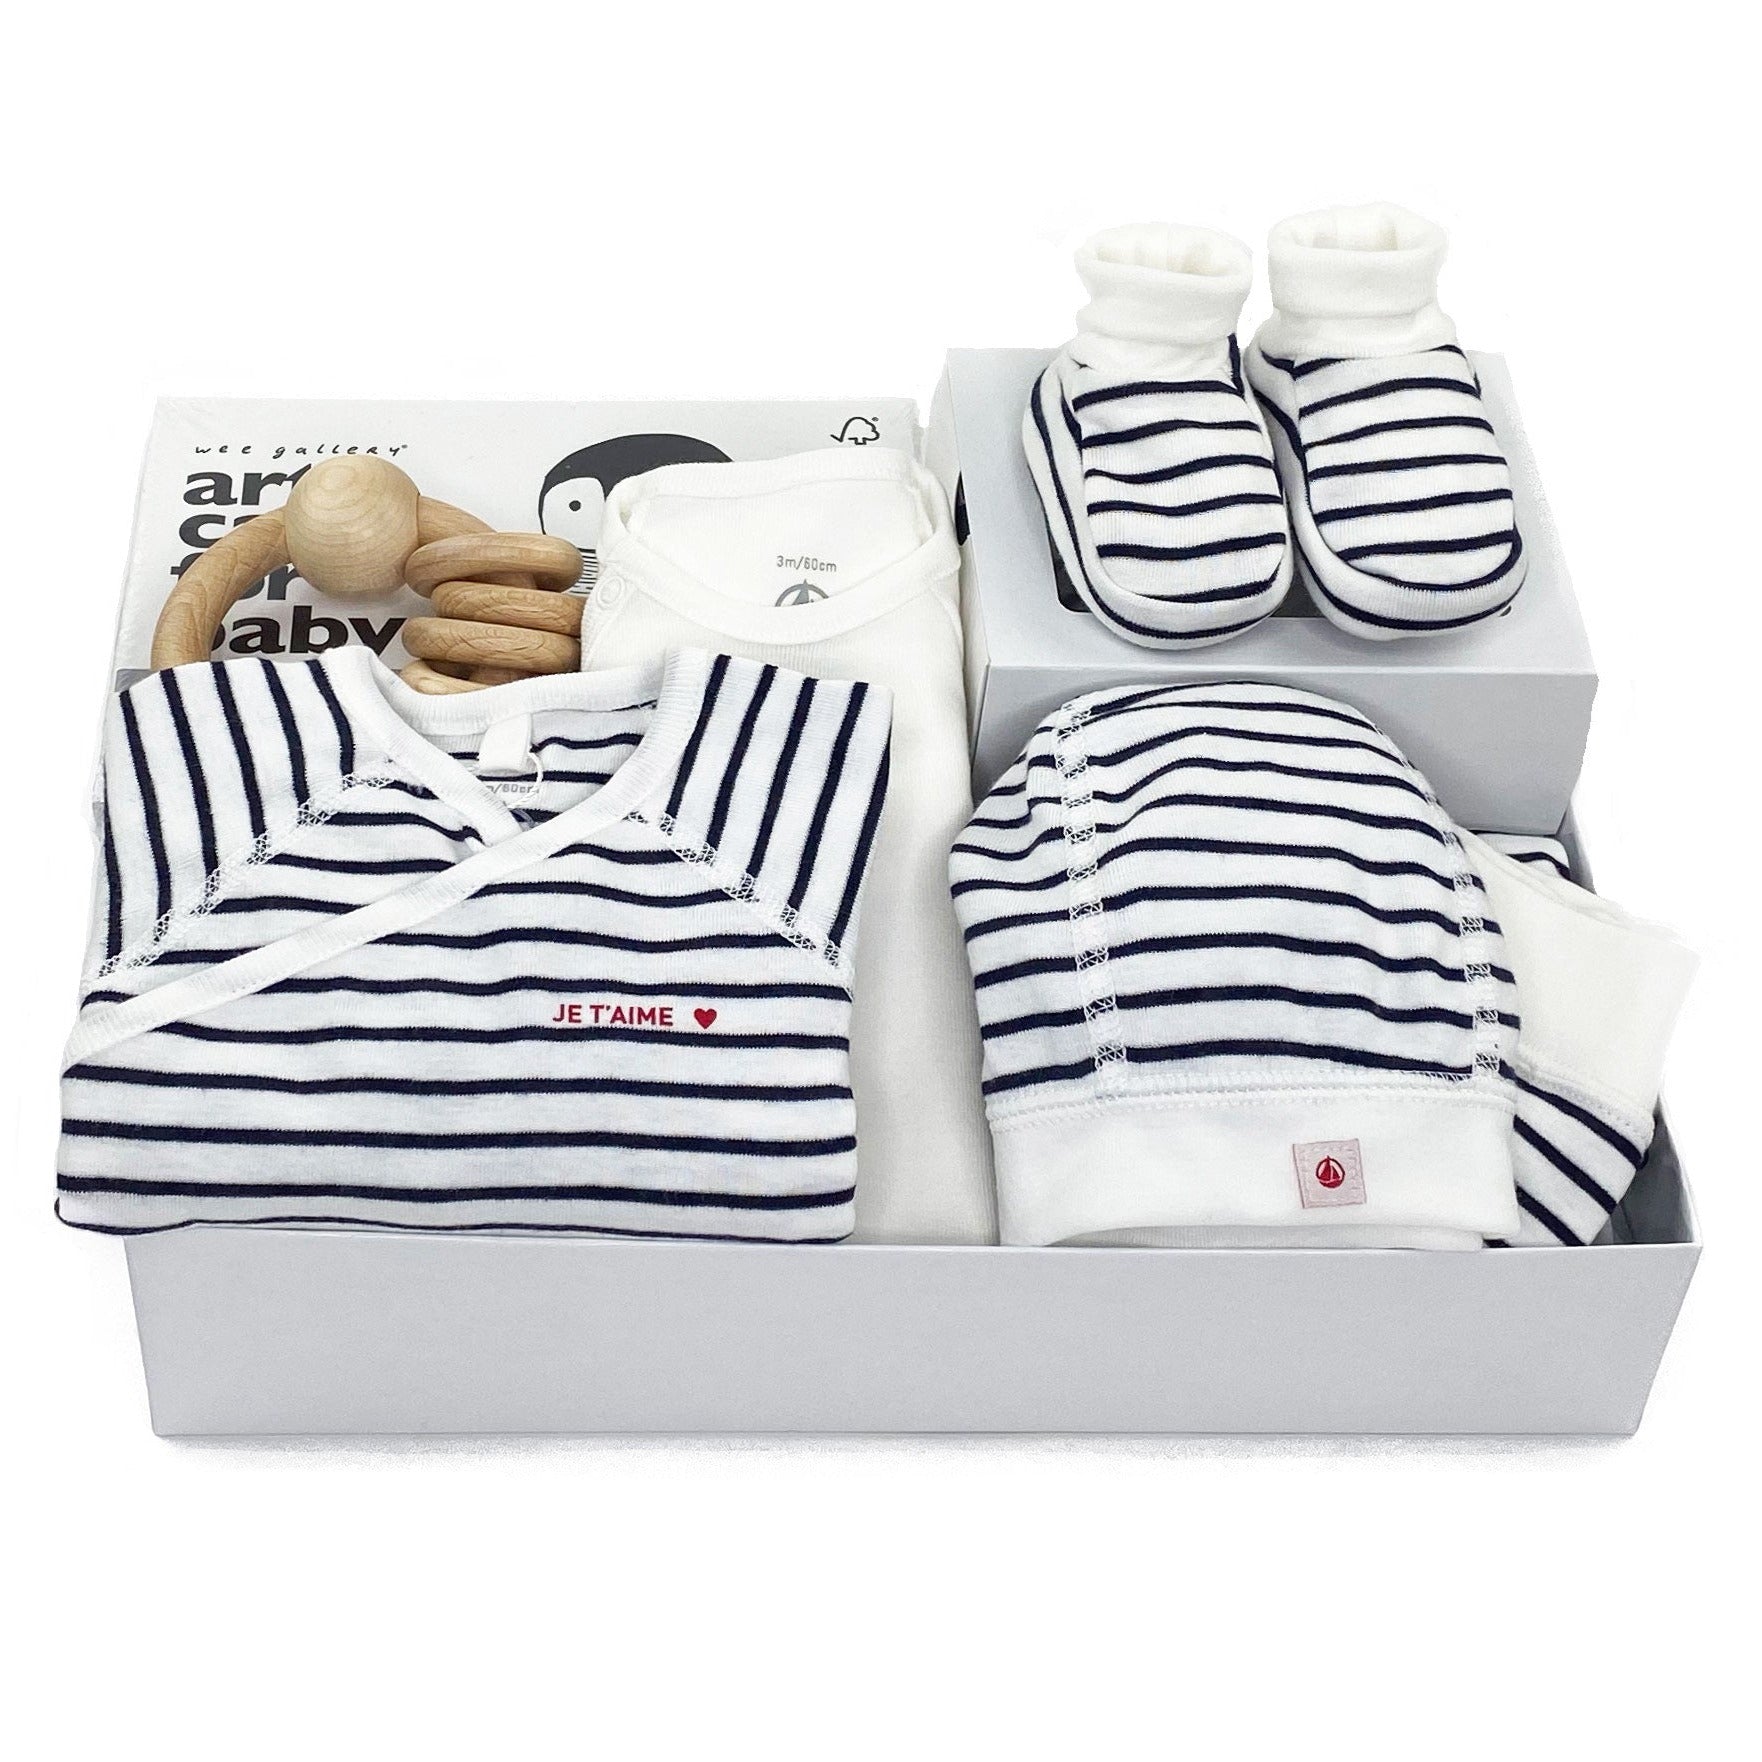 Luxury Baby Gift Box featuring Petit Bateau and curated baby gifts at Bonjour Baby Baskets